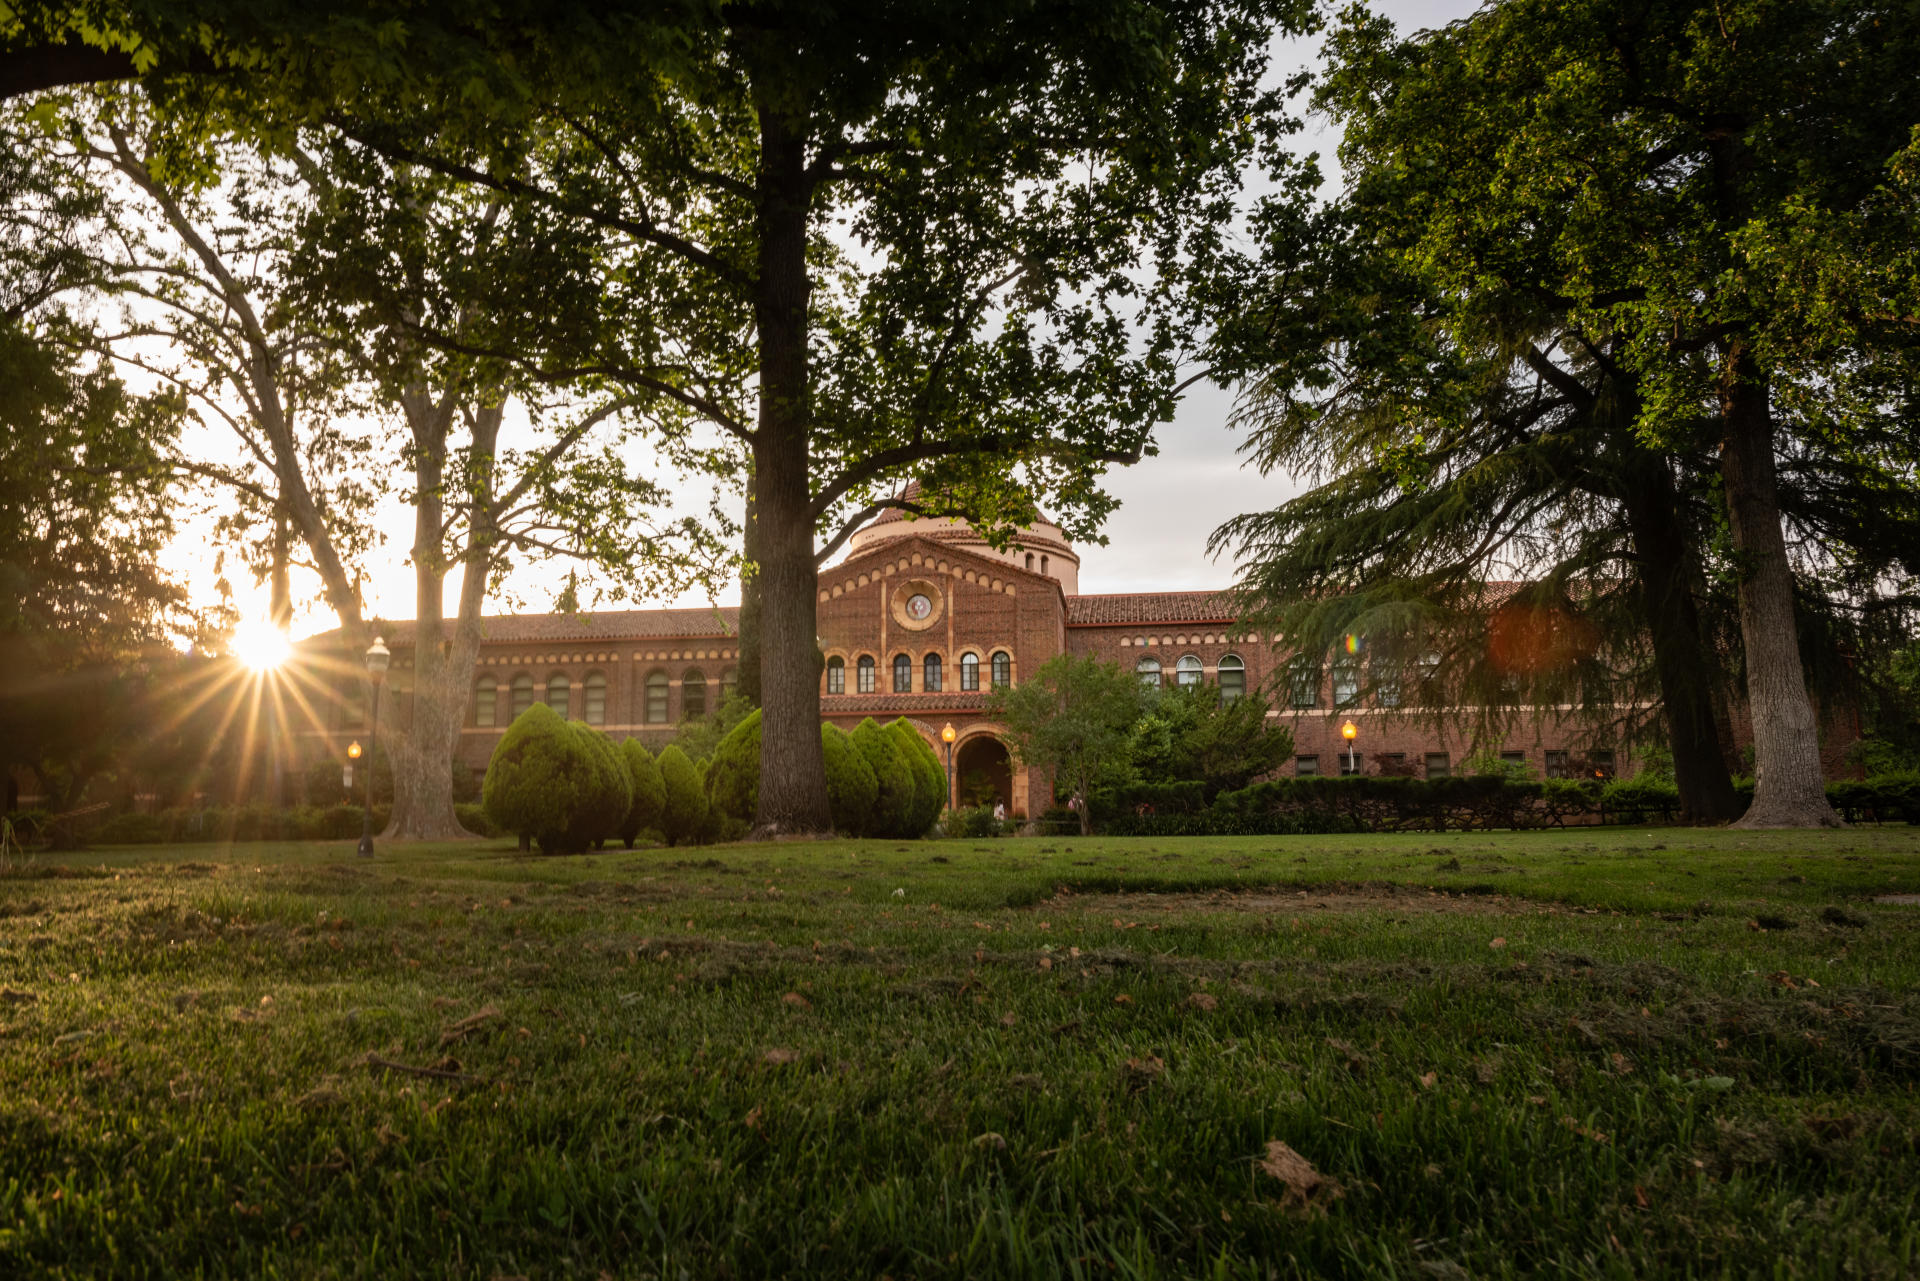 The late-afternoon sun peeks through branches and leaves in an academic setting.